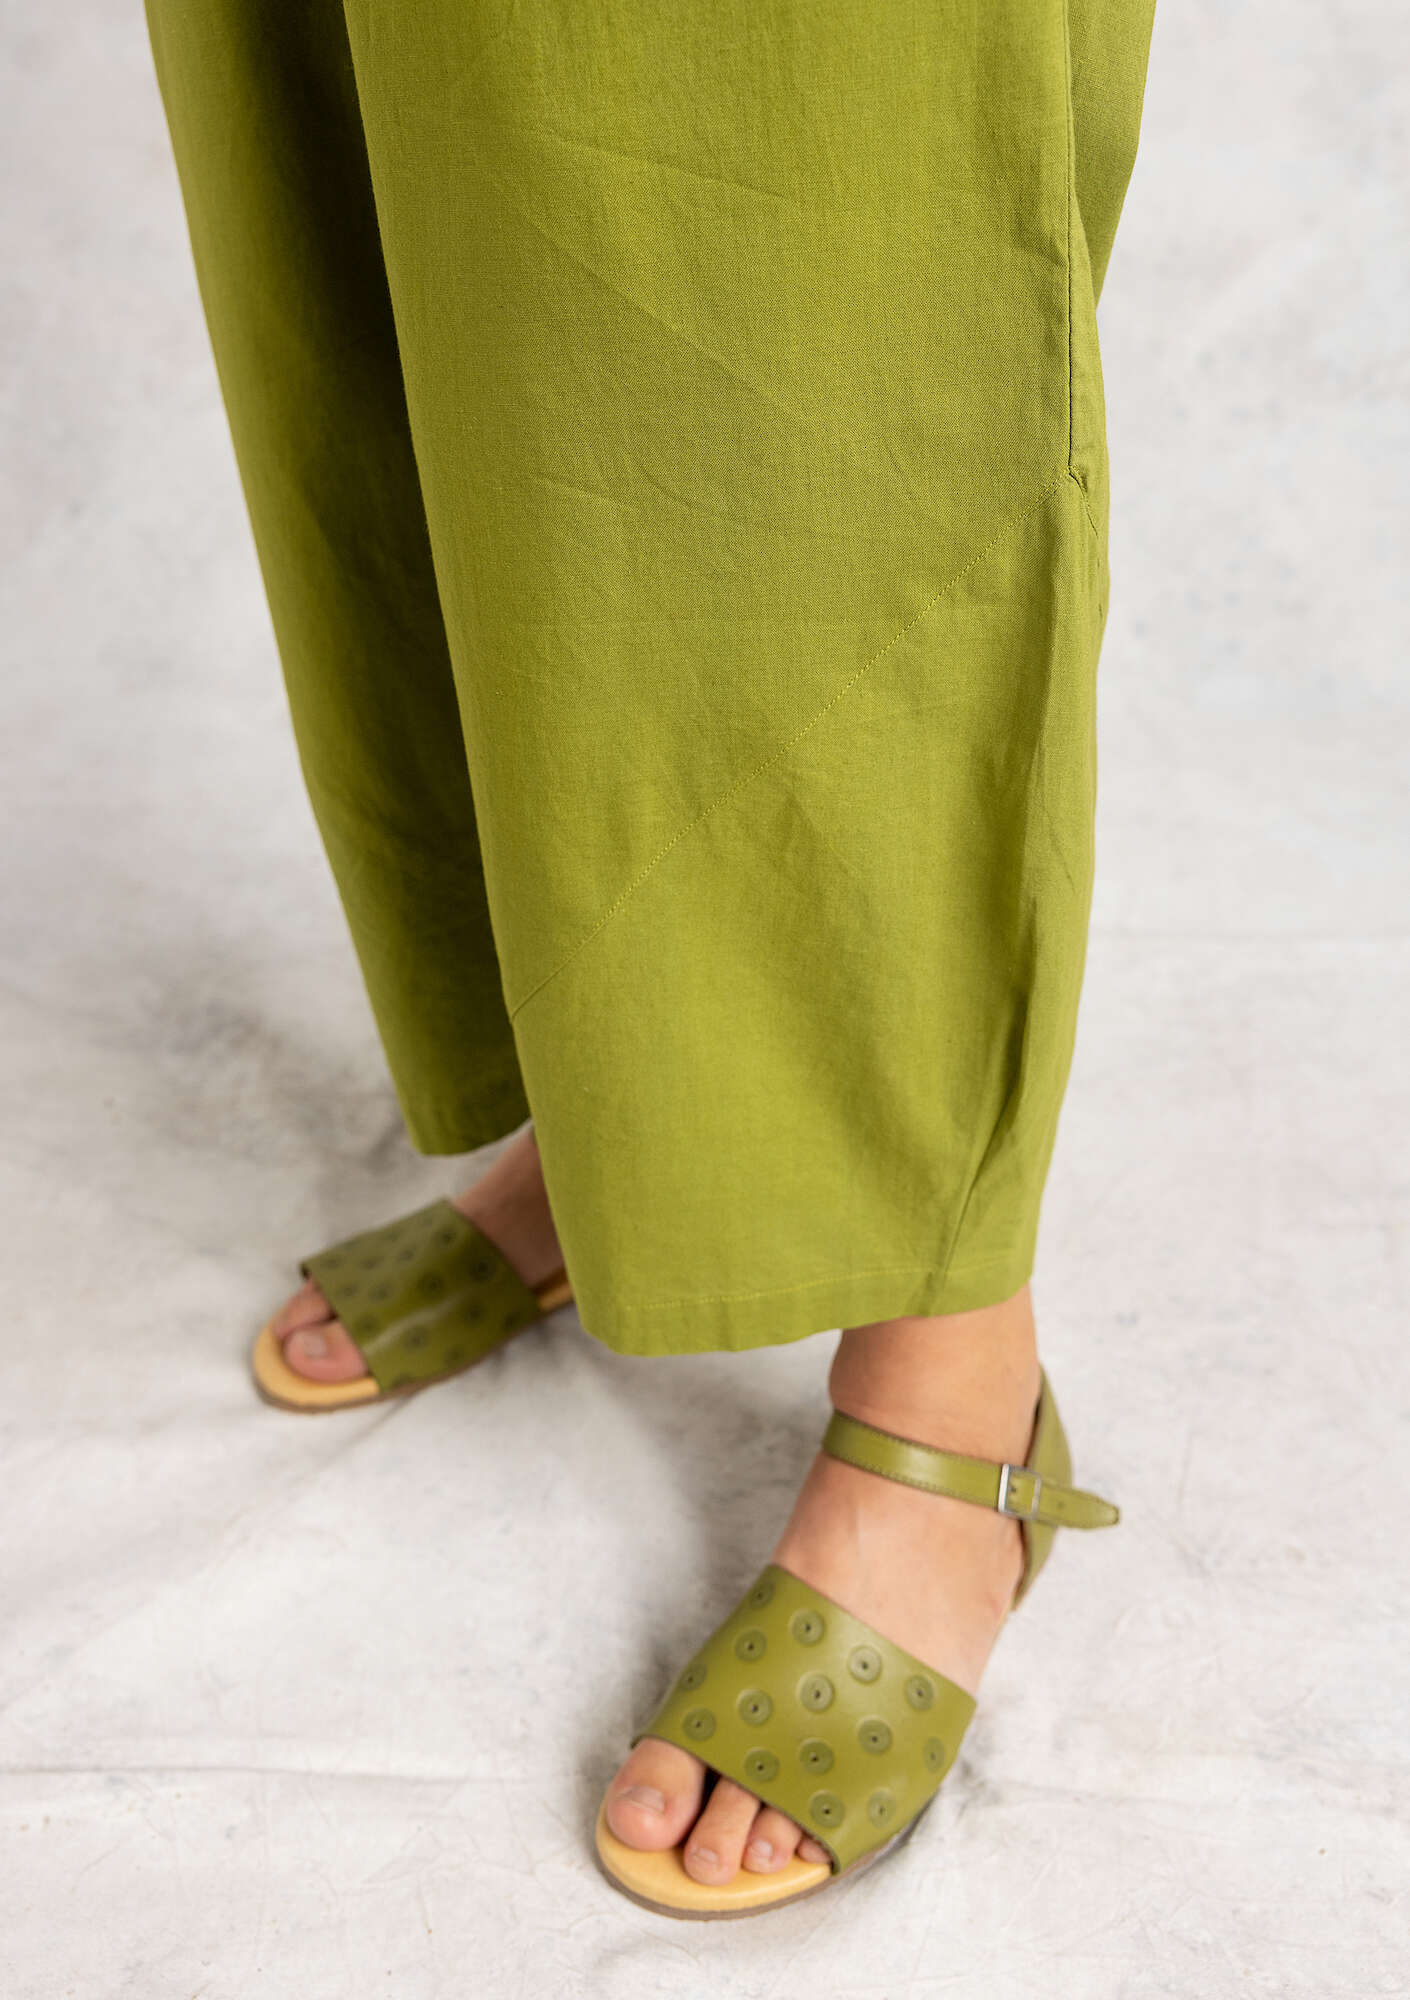 Woven organic cotton trousers birchleaf